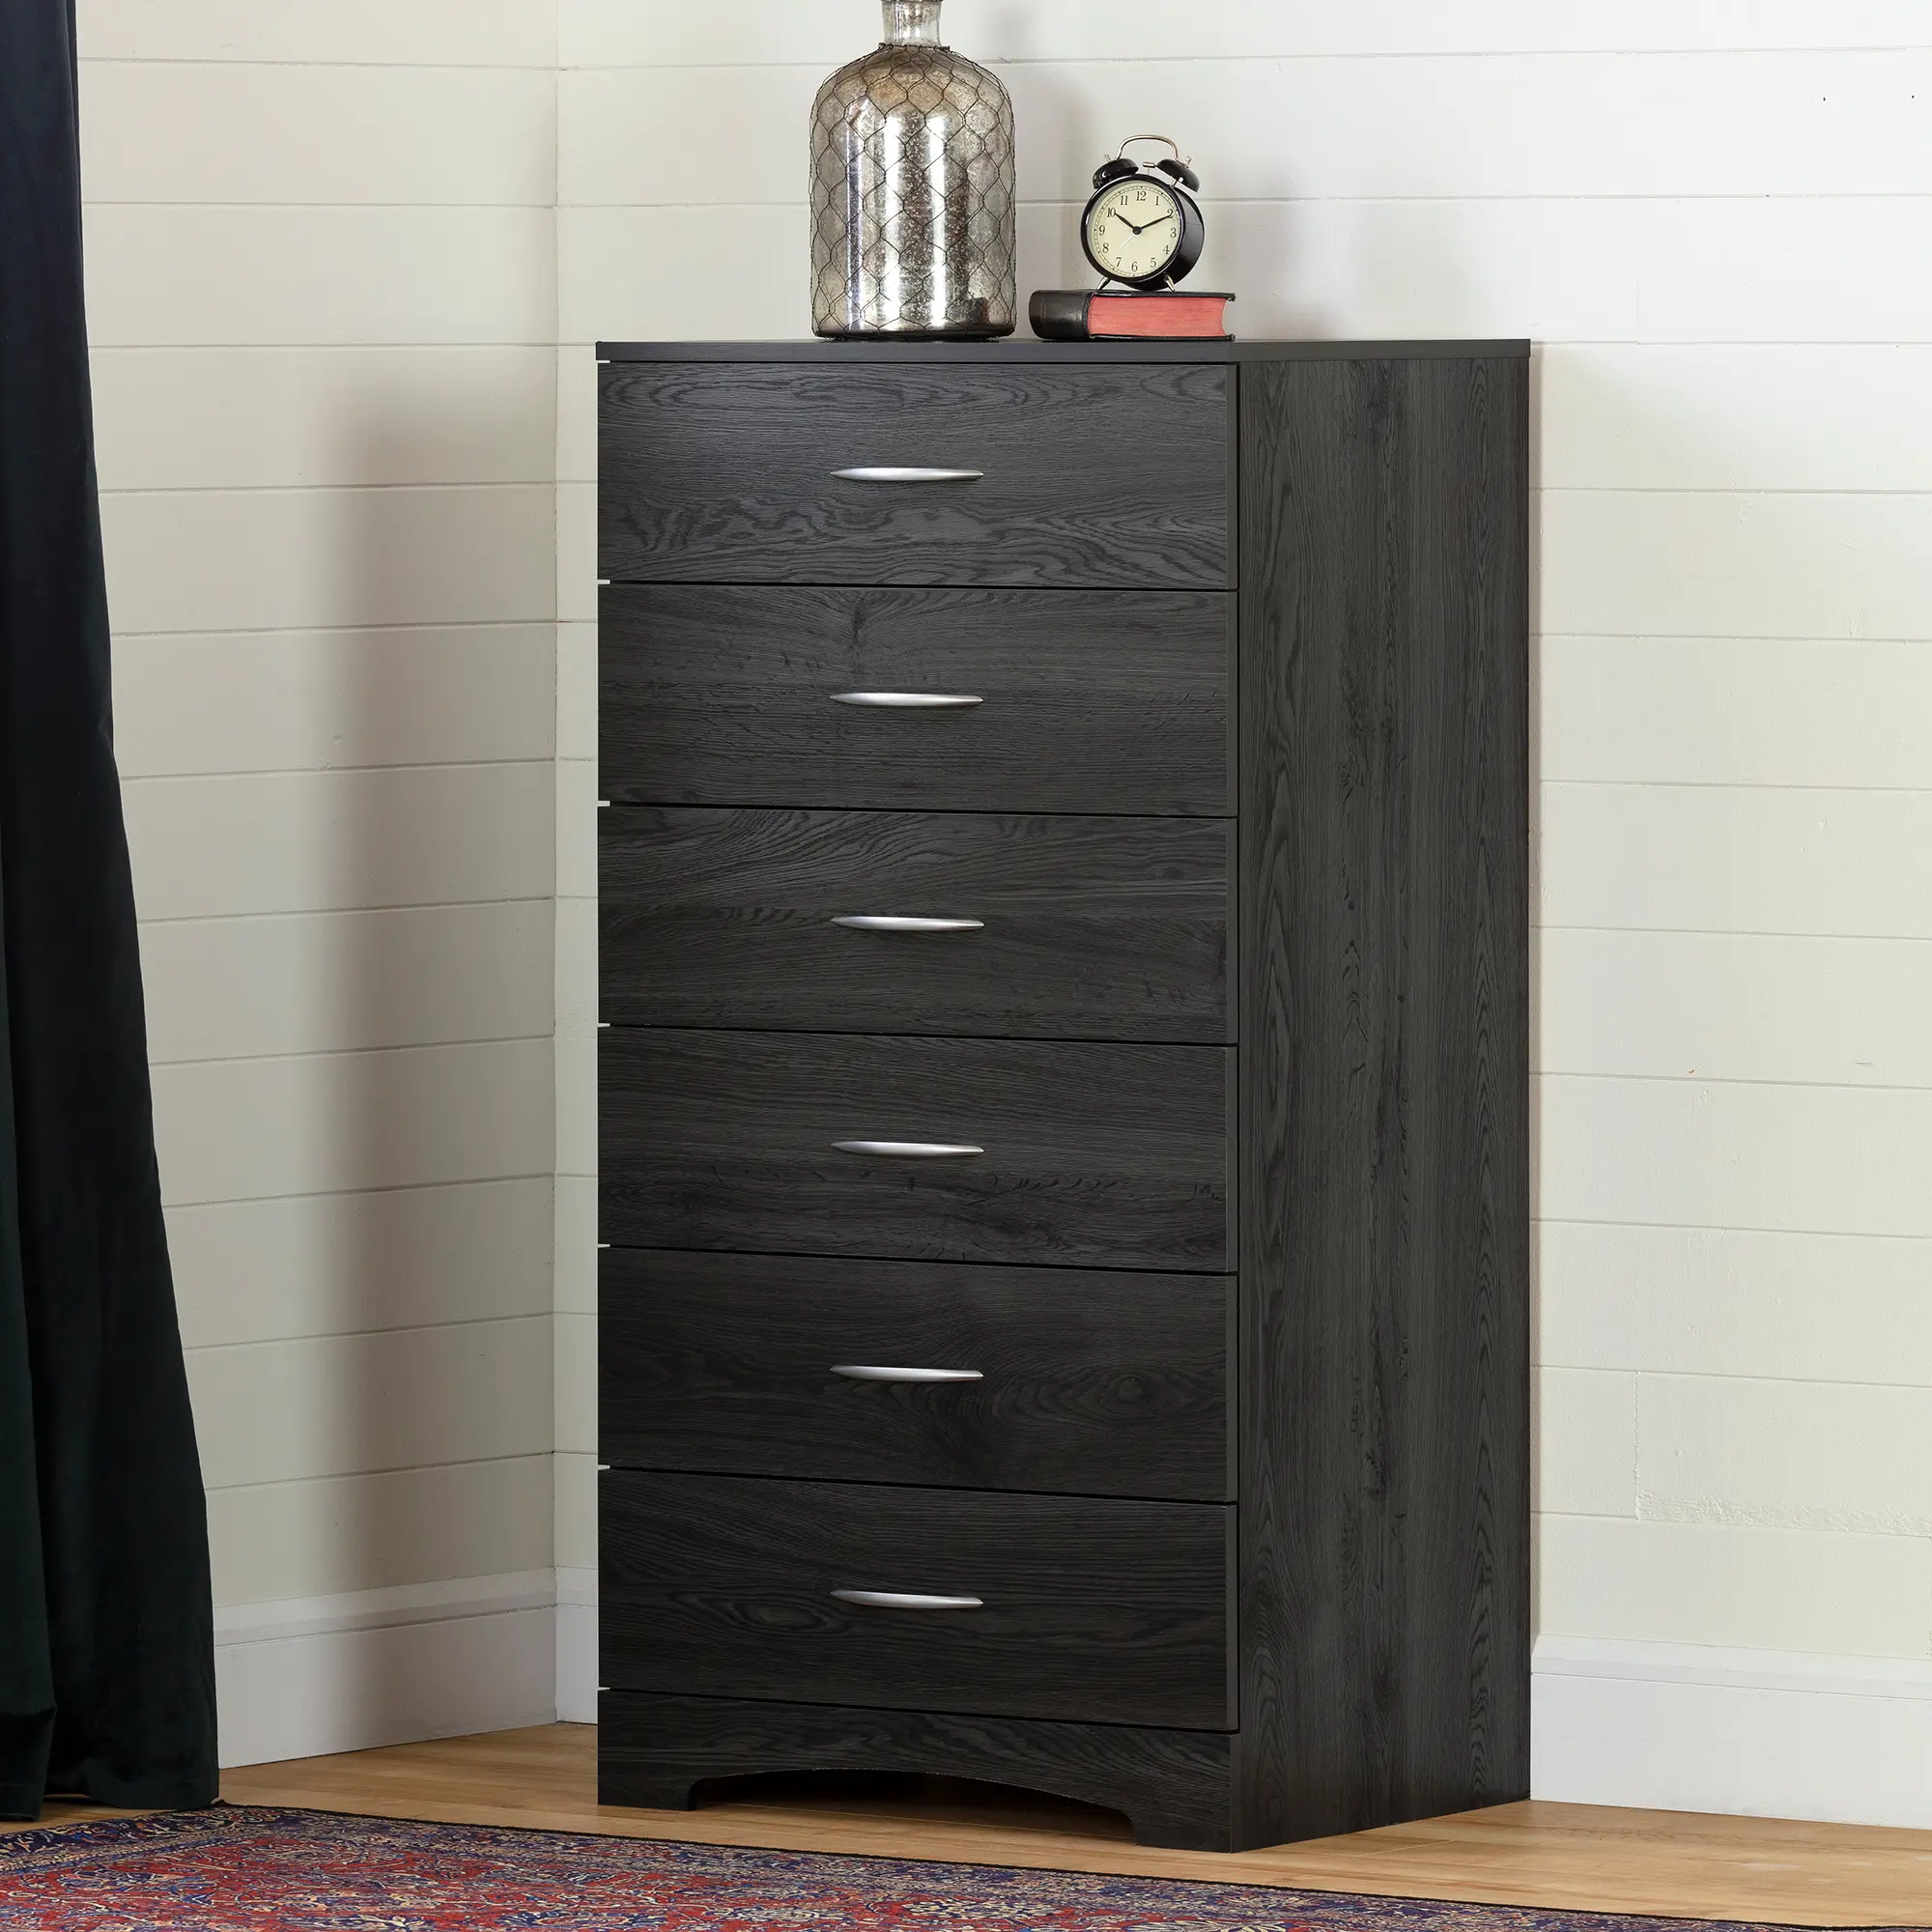 Photos - Dresser / Chests of Drawers South Shore Contemporary Gray Oak Lingerie Chest - South Shore 12951